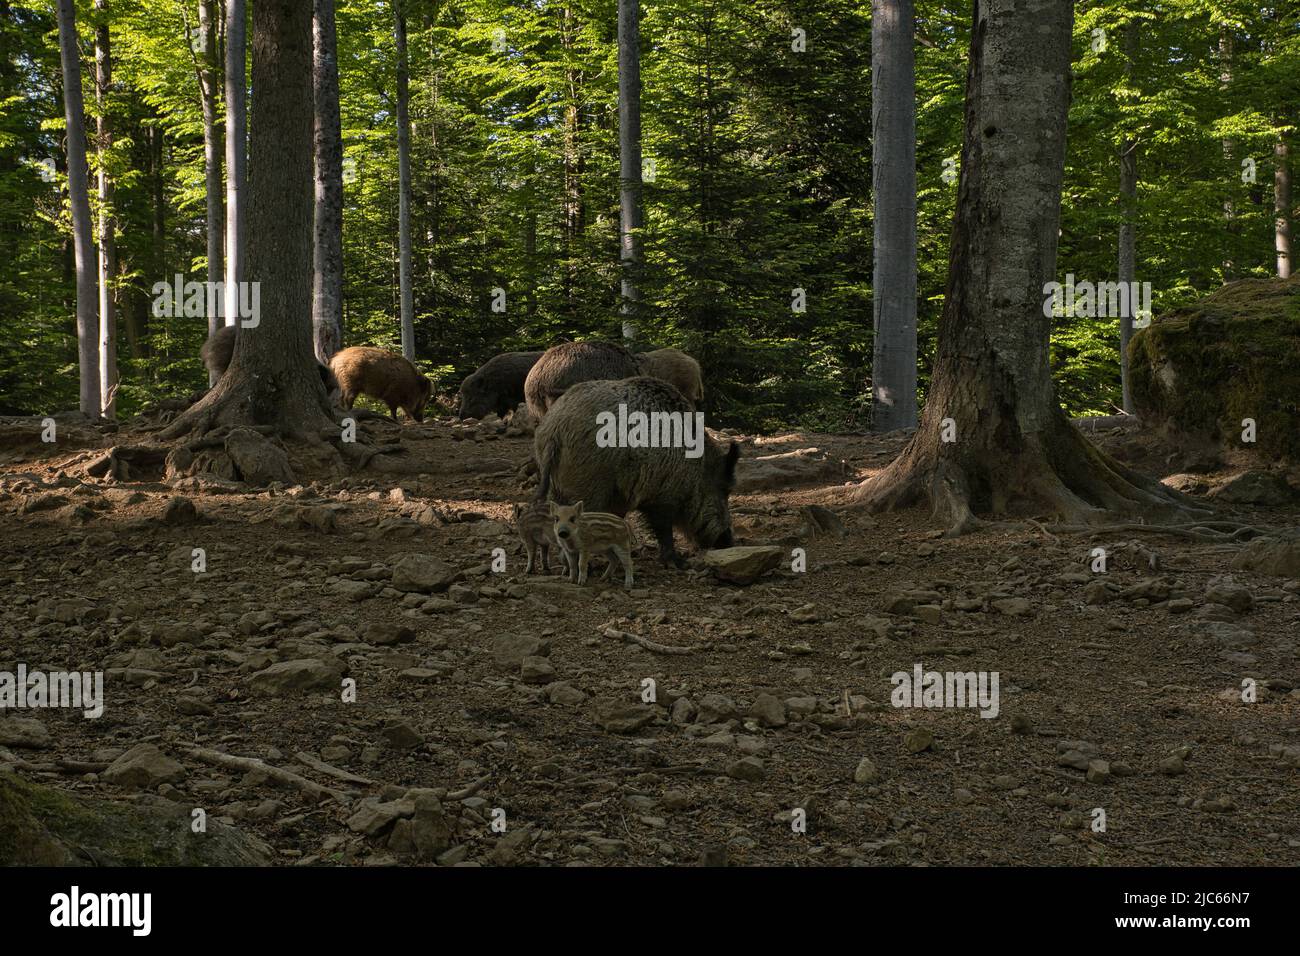 Several wild boars in the forest with two young wild boars Stock Photo